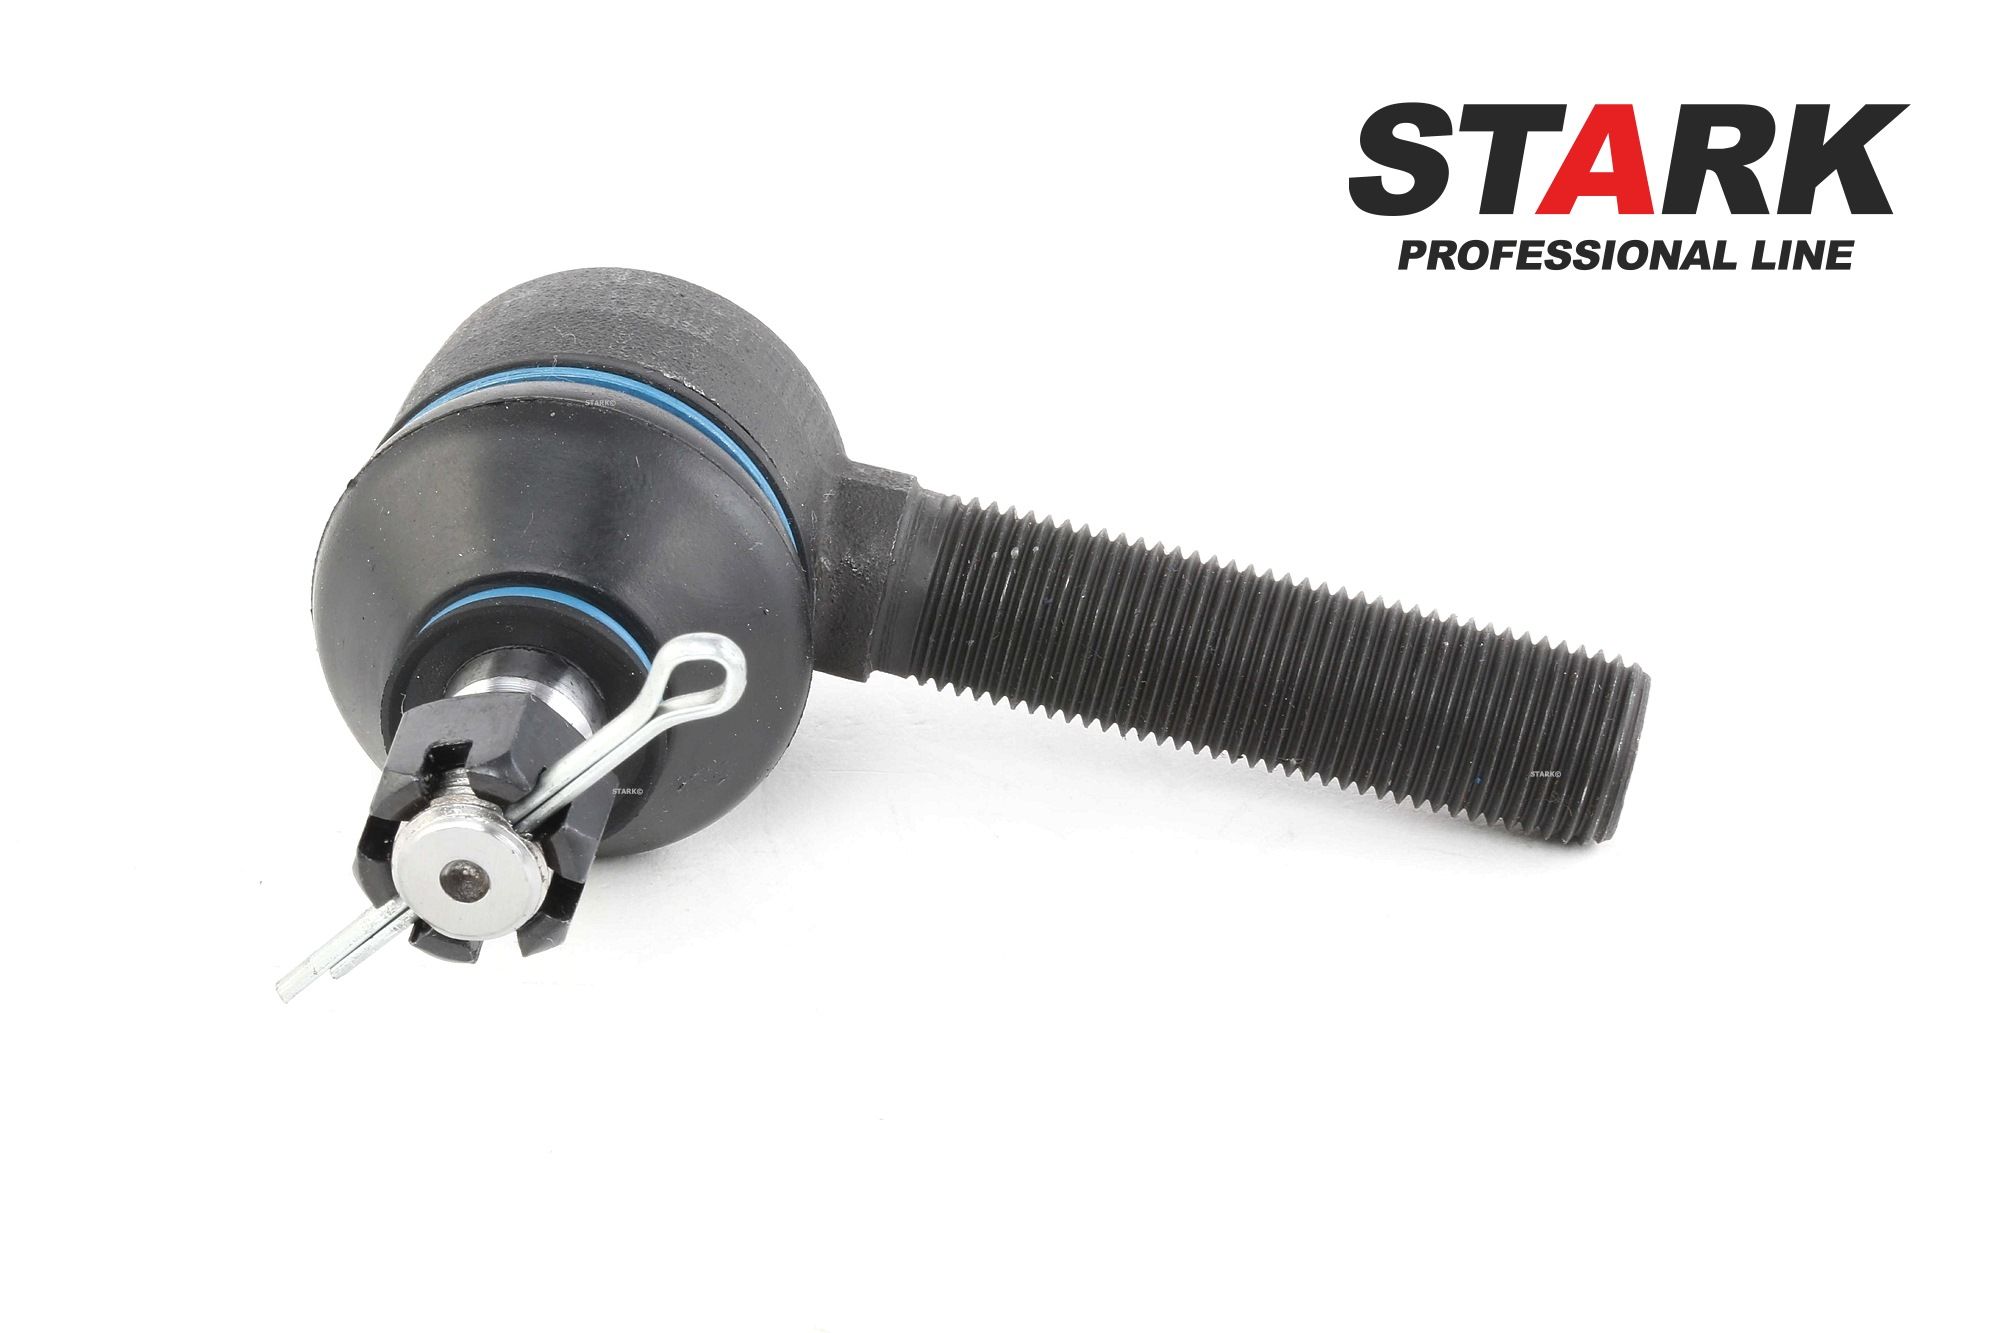 STARK SKTE-0280270 Track rod end Cone Size 12,5 mm, Front axle both sides